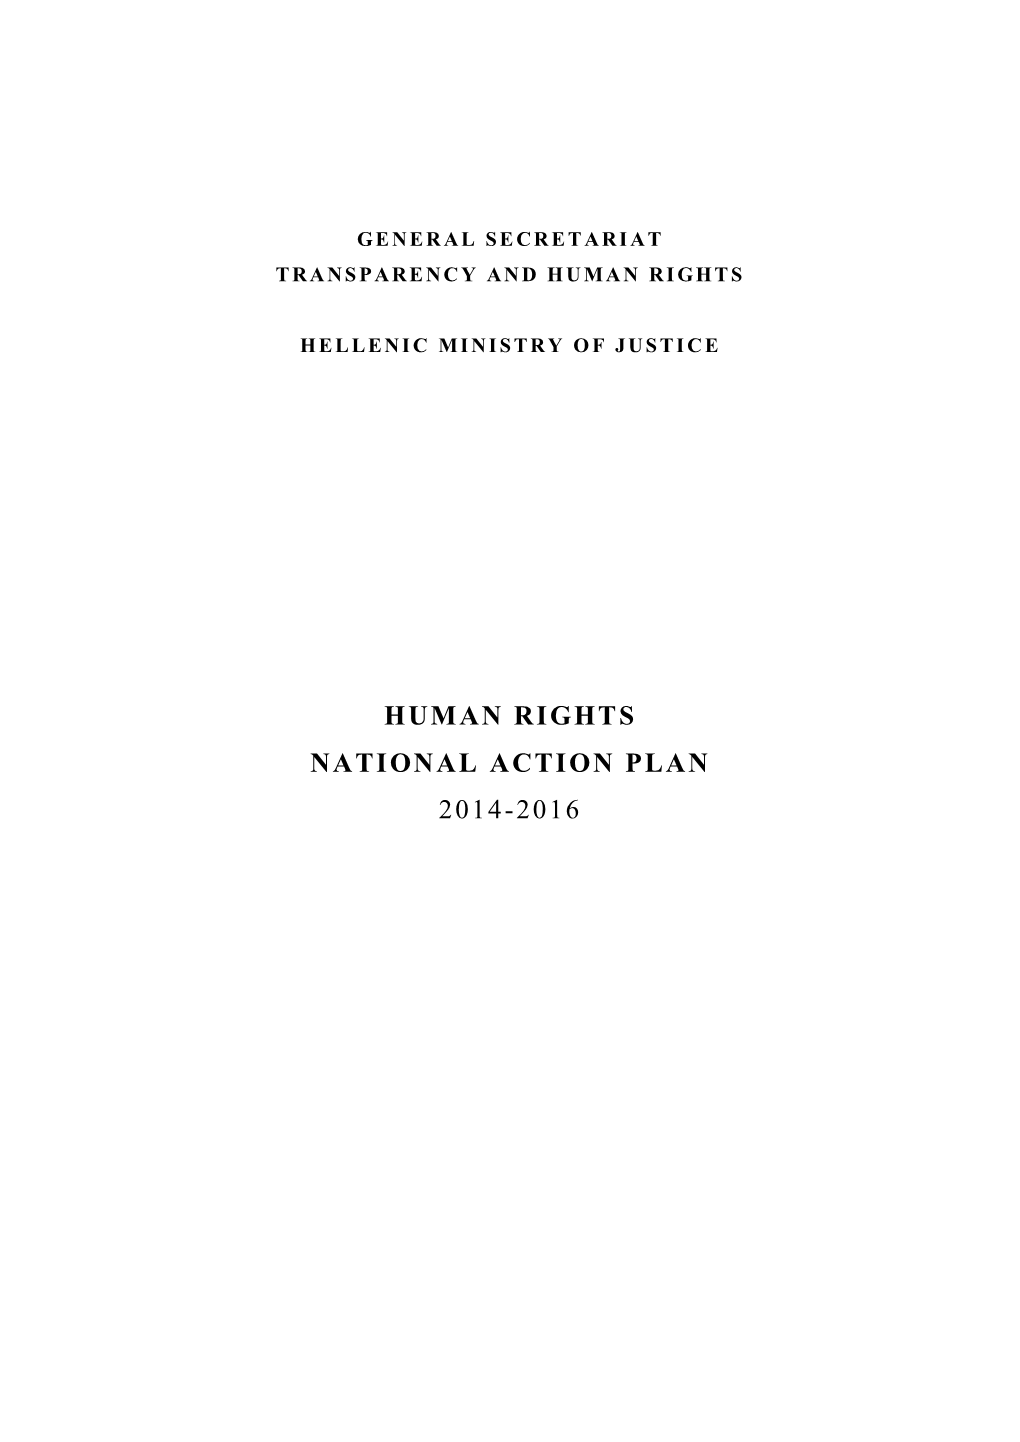 Human Rights National Action Plan 2014-2016